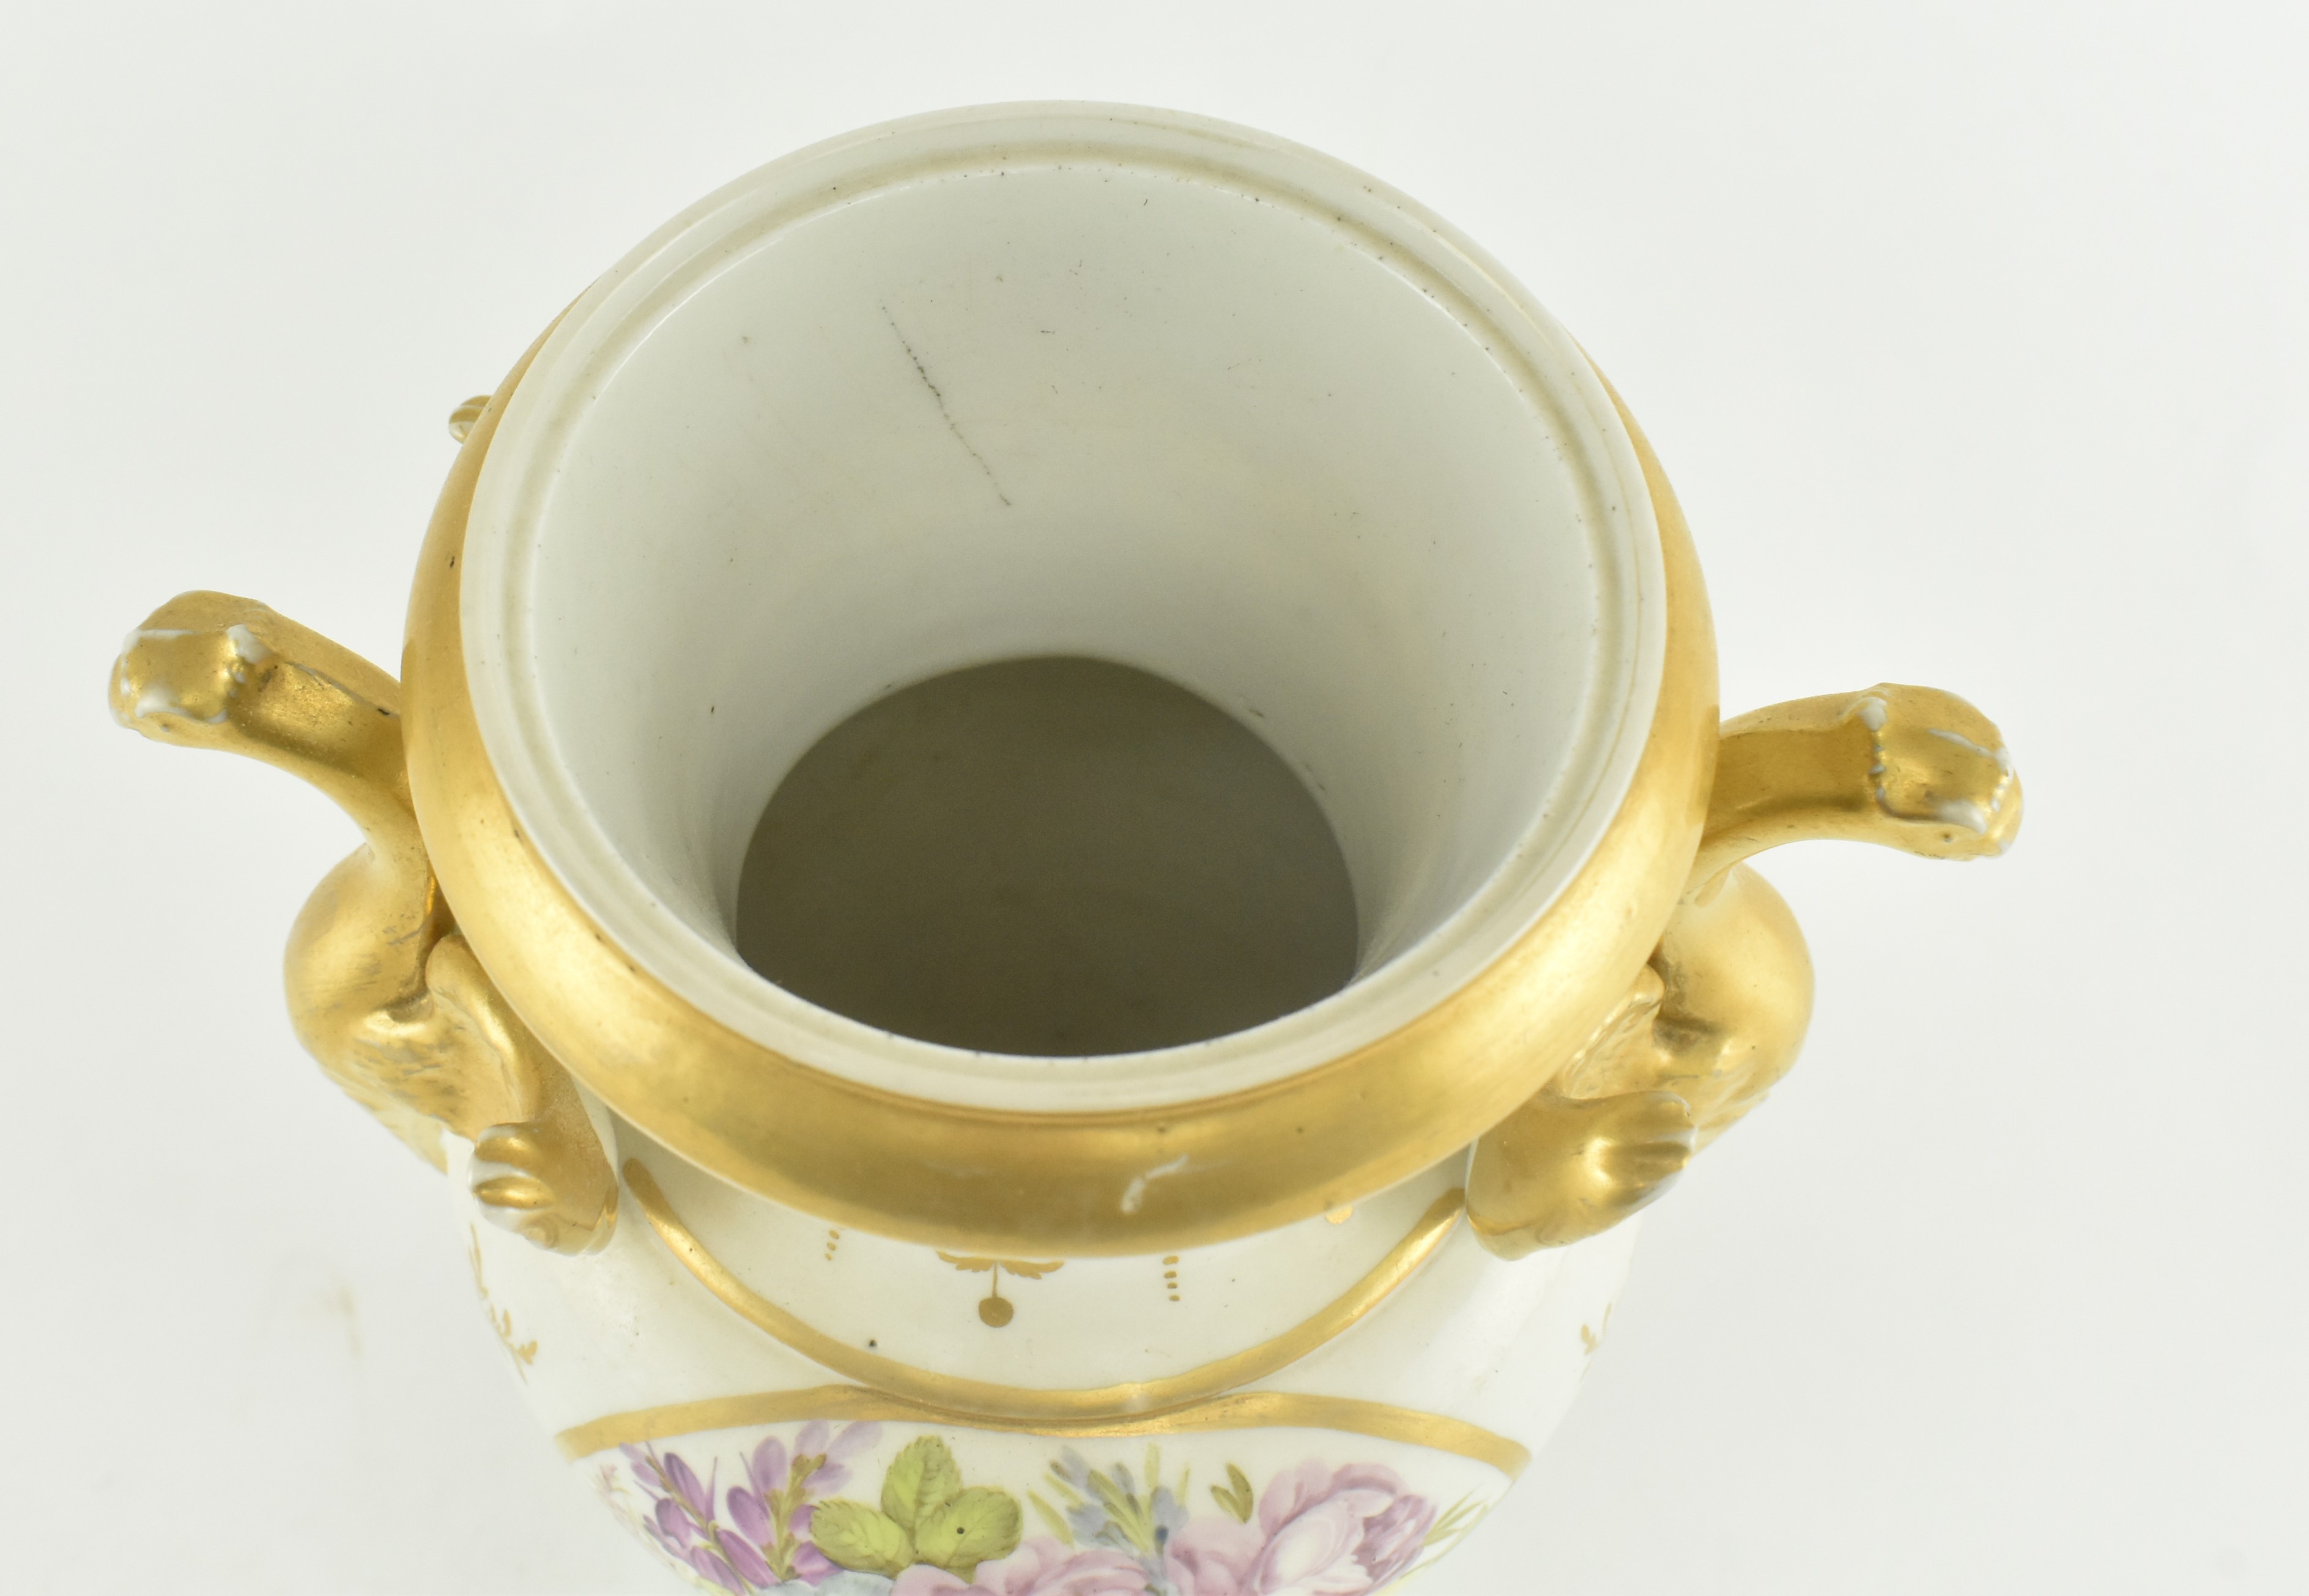 EARLY 19TH CENTURY CHAMBERLAIN'S WORCESTER URN VASE - Image 2 of 7